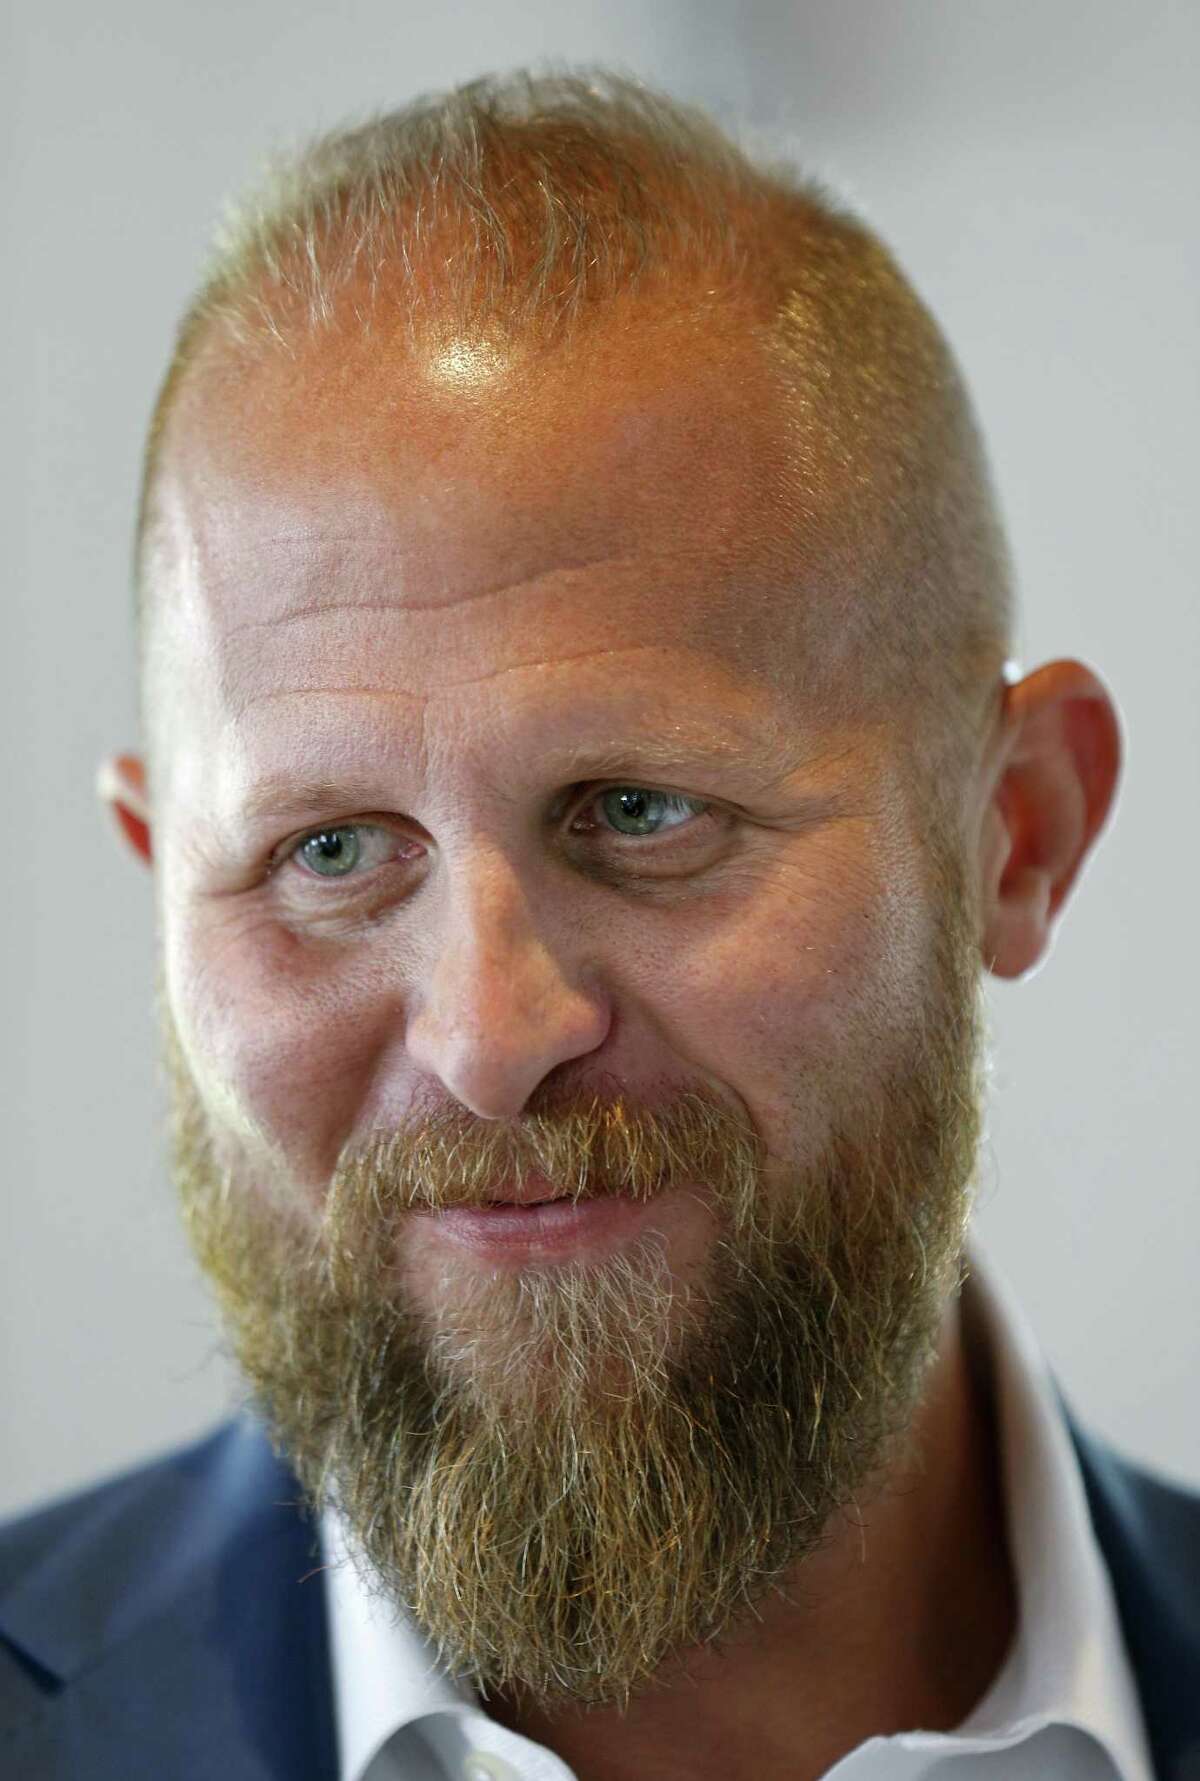 Portrait of Brad Parscale Monday July 10, 2017 at Giles-Parscale. Parscale is campaign adviser to President Donald Trump.